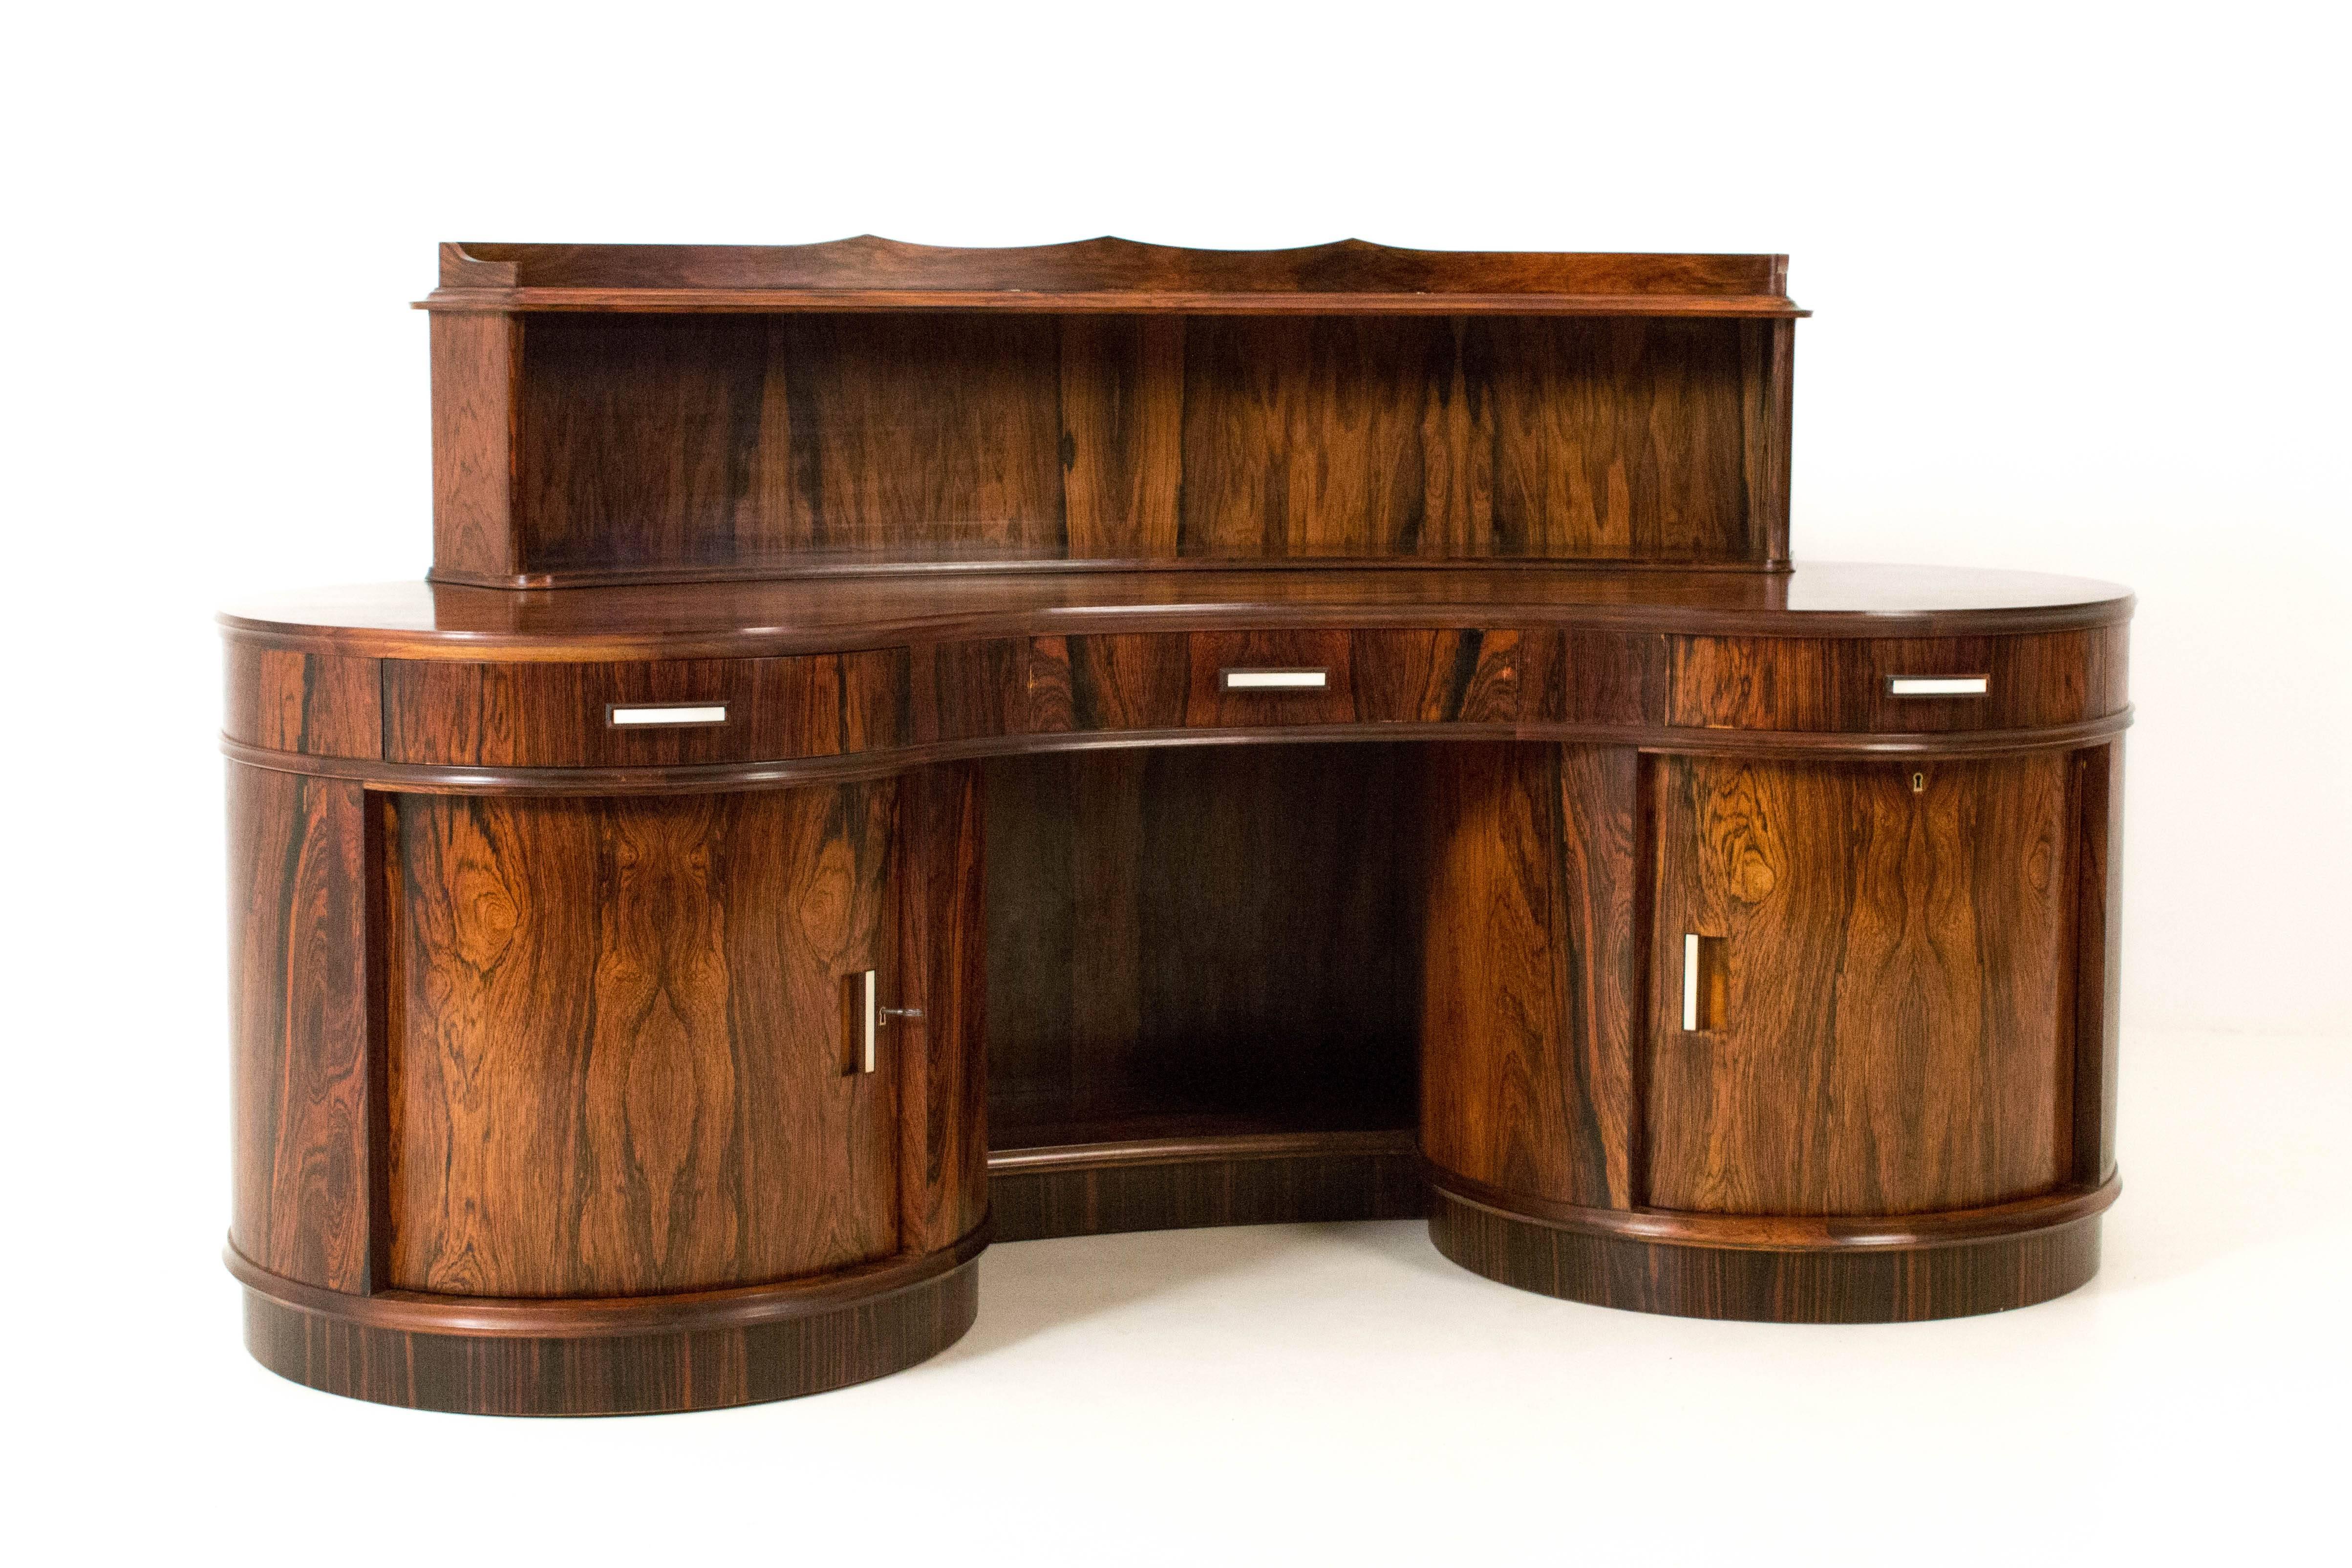 Magnificent Art Deco kidney shaped desk with armchair by Reens Amsterdam.
Rosewood and Macassar ebony.
Behind the left door there are nine original solid oak drawers.
The right door is executed with ball-bearing, enabling the drum to rotate